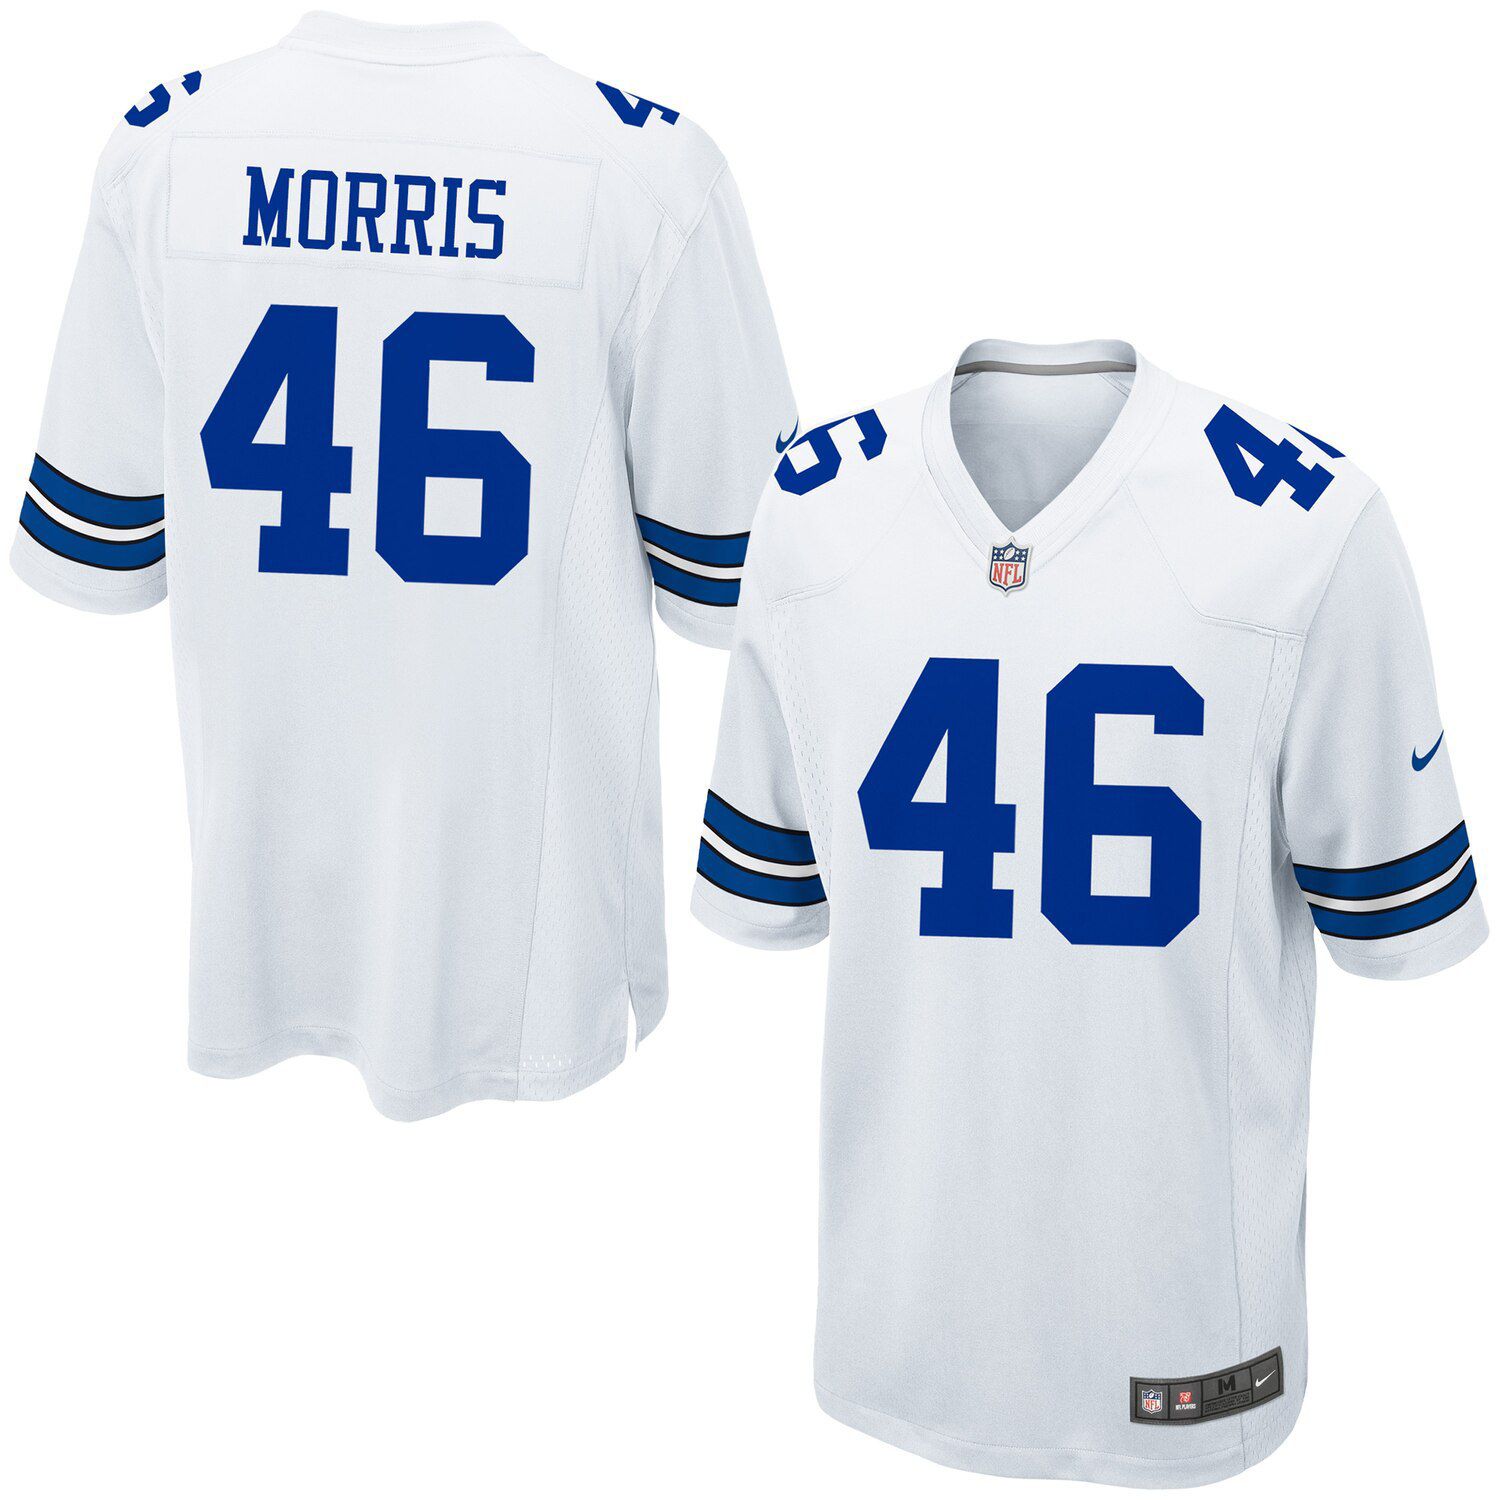 alfred morris jersey